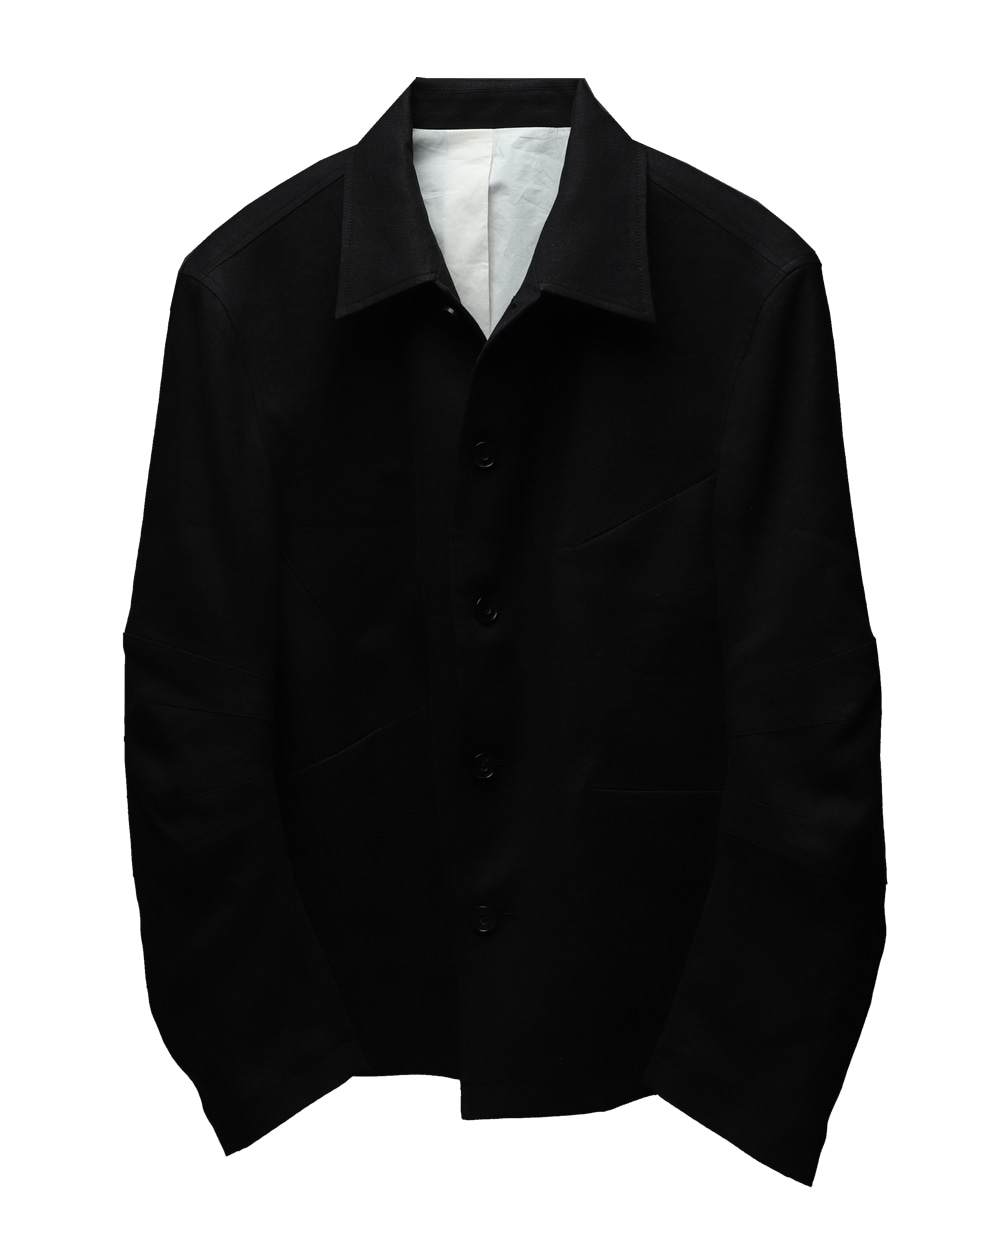 LCBX Elbow patch worker’s jacket (Black)